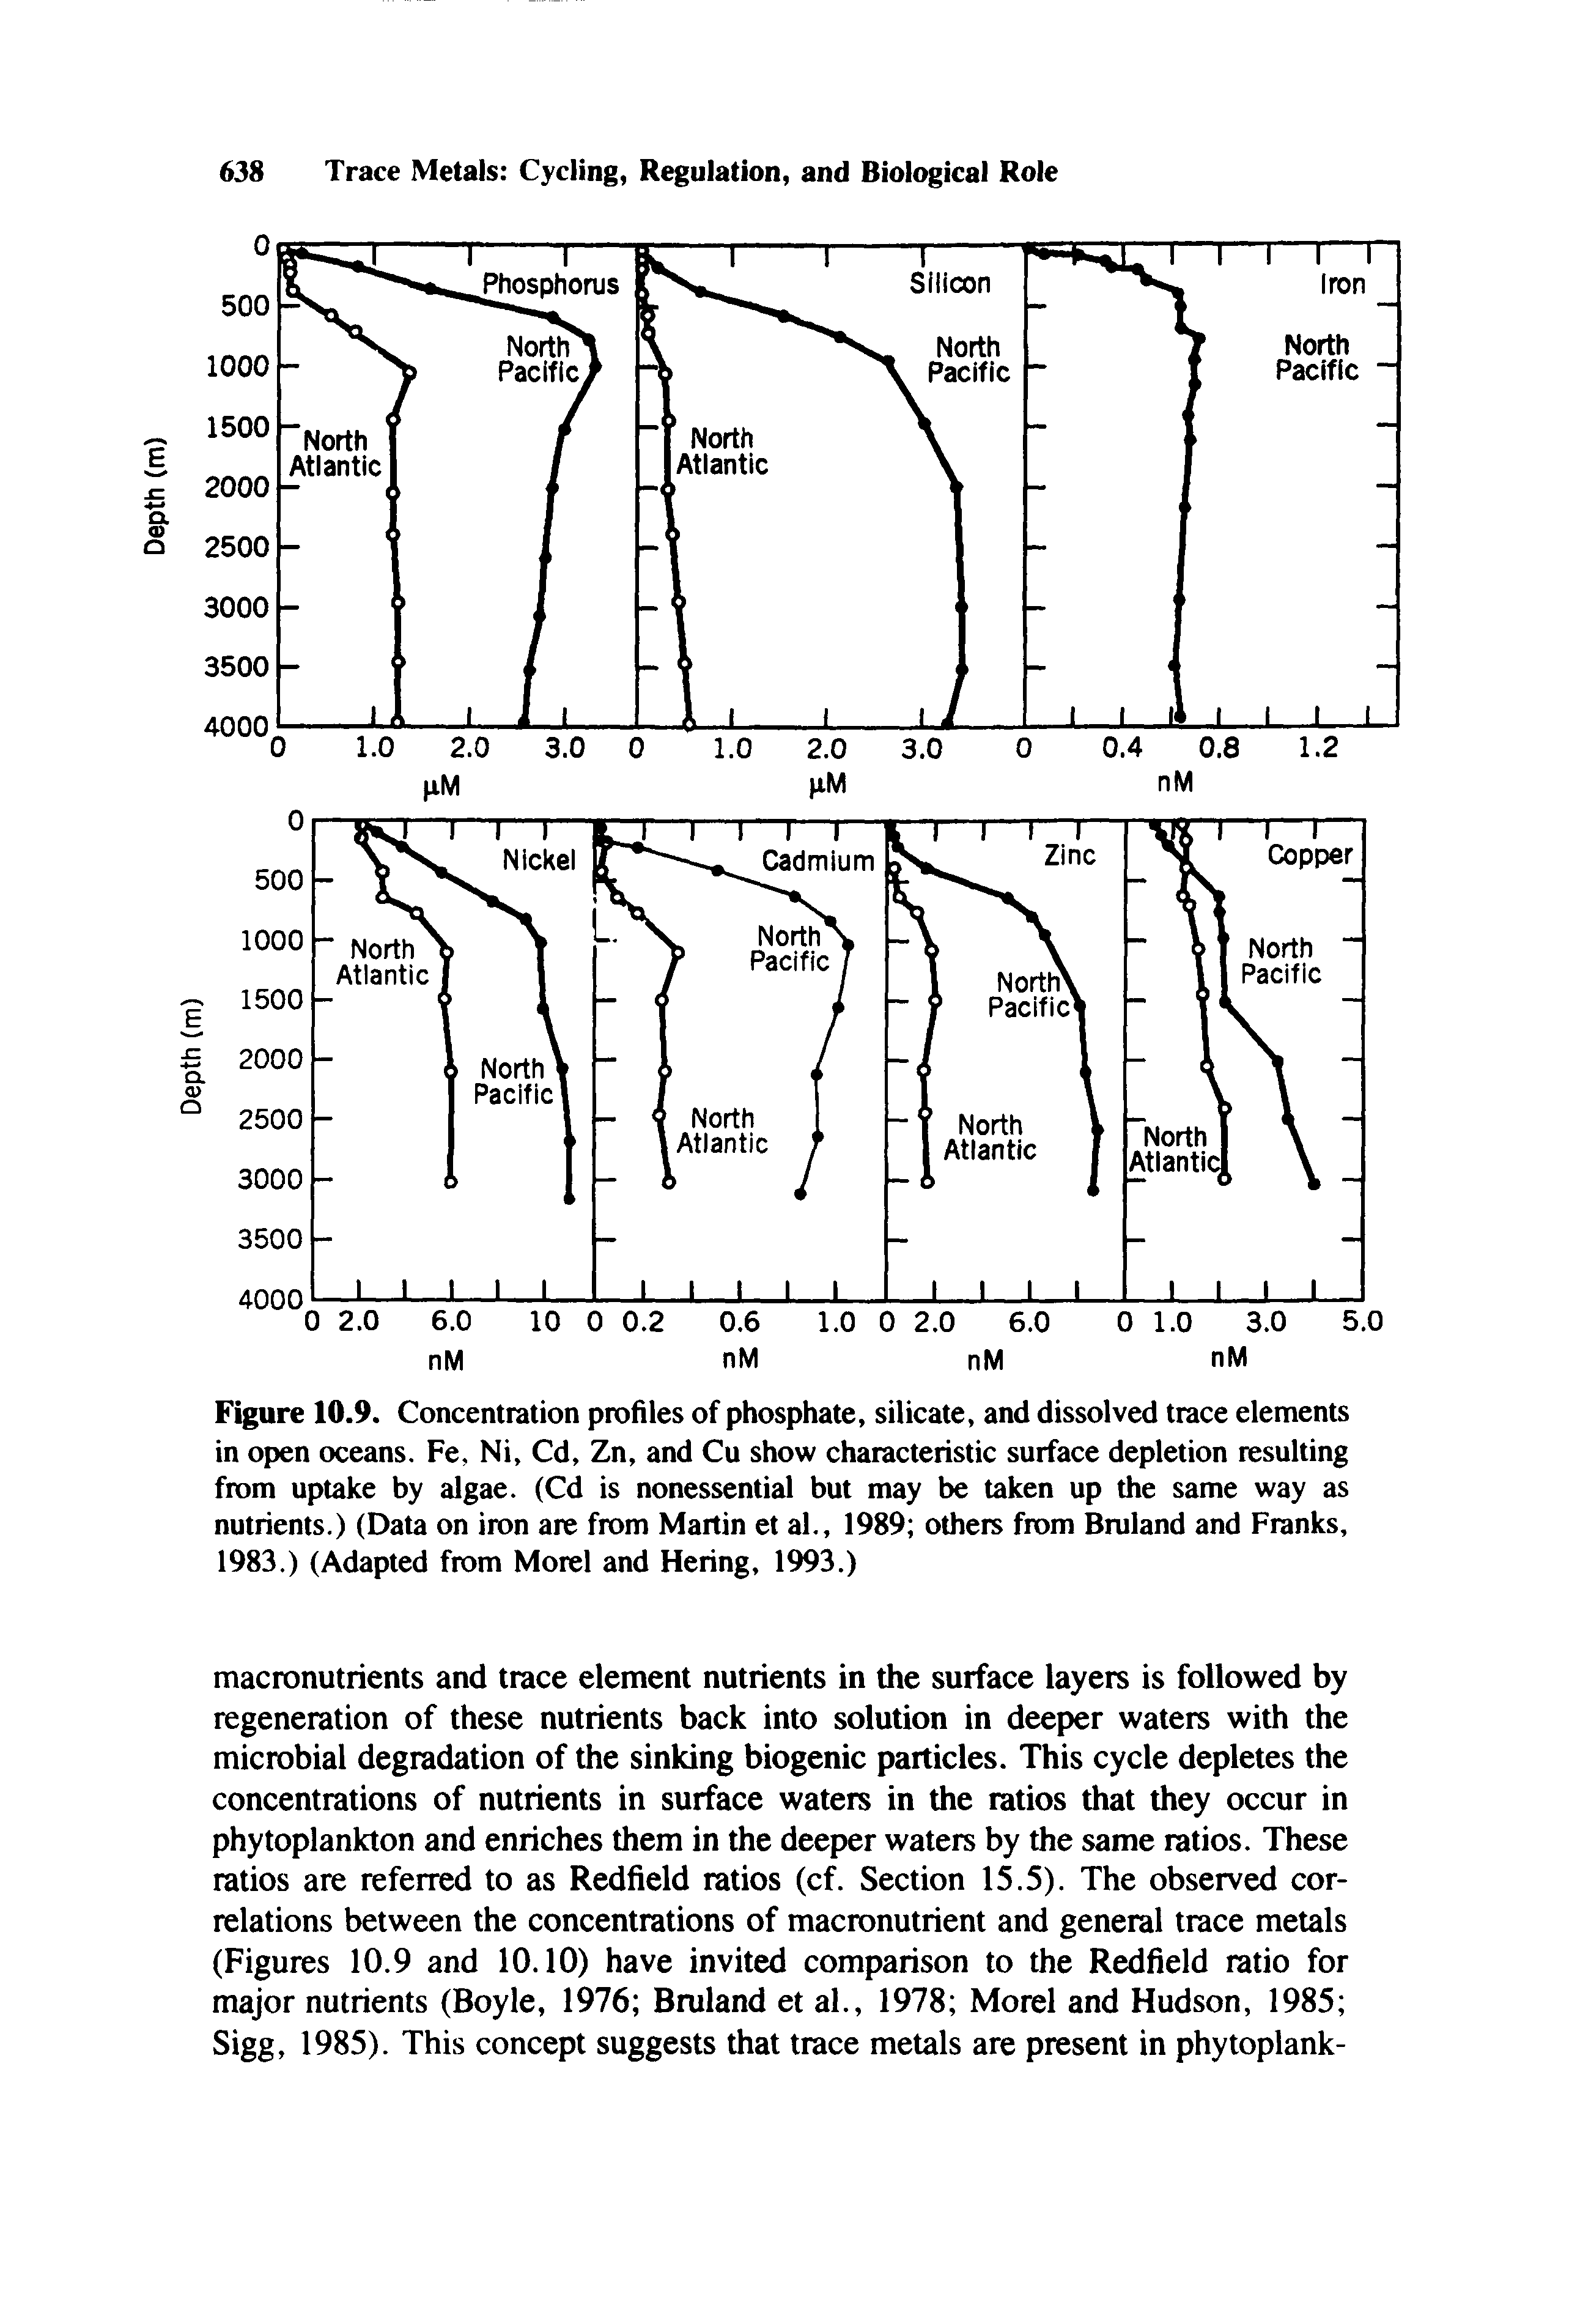 Figure 10.9. Concentration profiles of phosphate, silicate, and dissolved trace elements in open oceans. Fe, Ni, Cd, Zn, and Cu show characteristic surface depletion resulting from uptake by algae. (Cd is nonessential but may be taken up the same way as nutrients.) (Data on iron are from Martin et al., 1989 others from Bruland and Franks, 1983.) (Adapted from Morel and Hering, 1993.)...